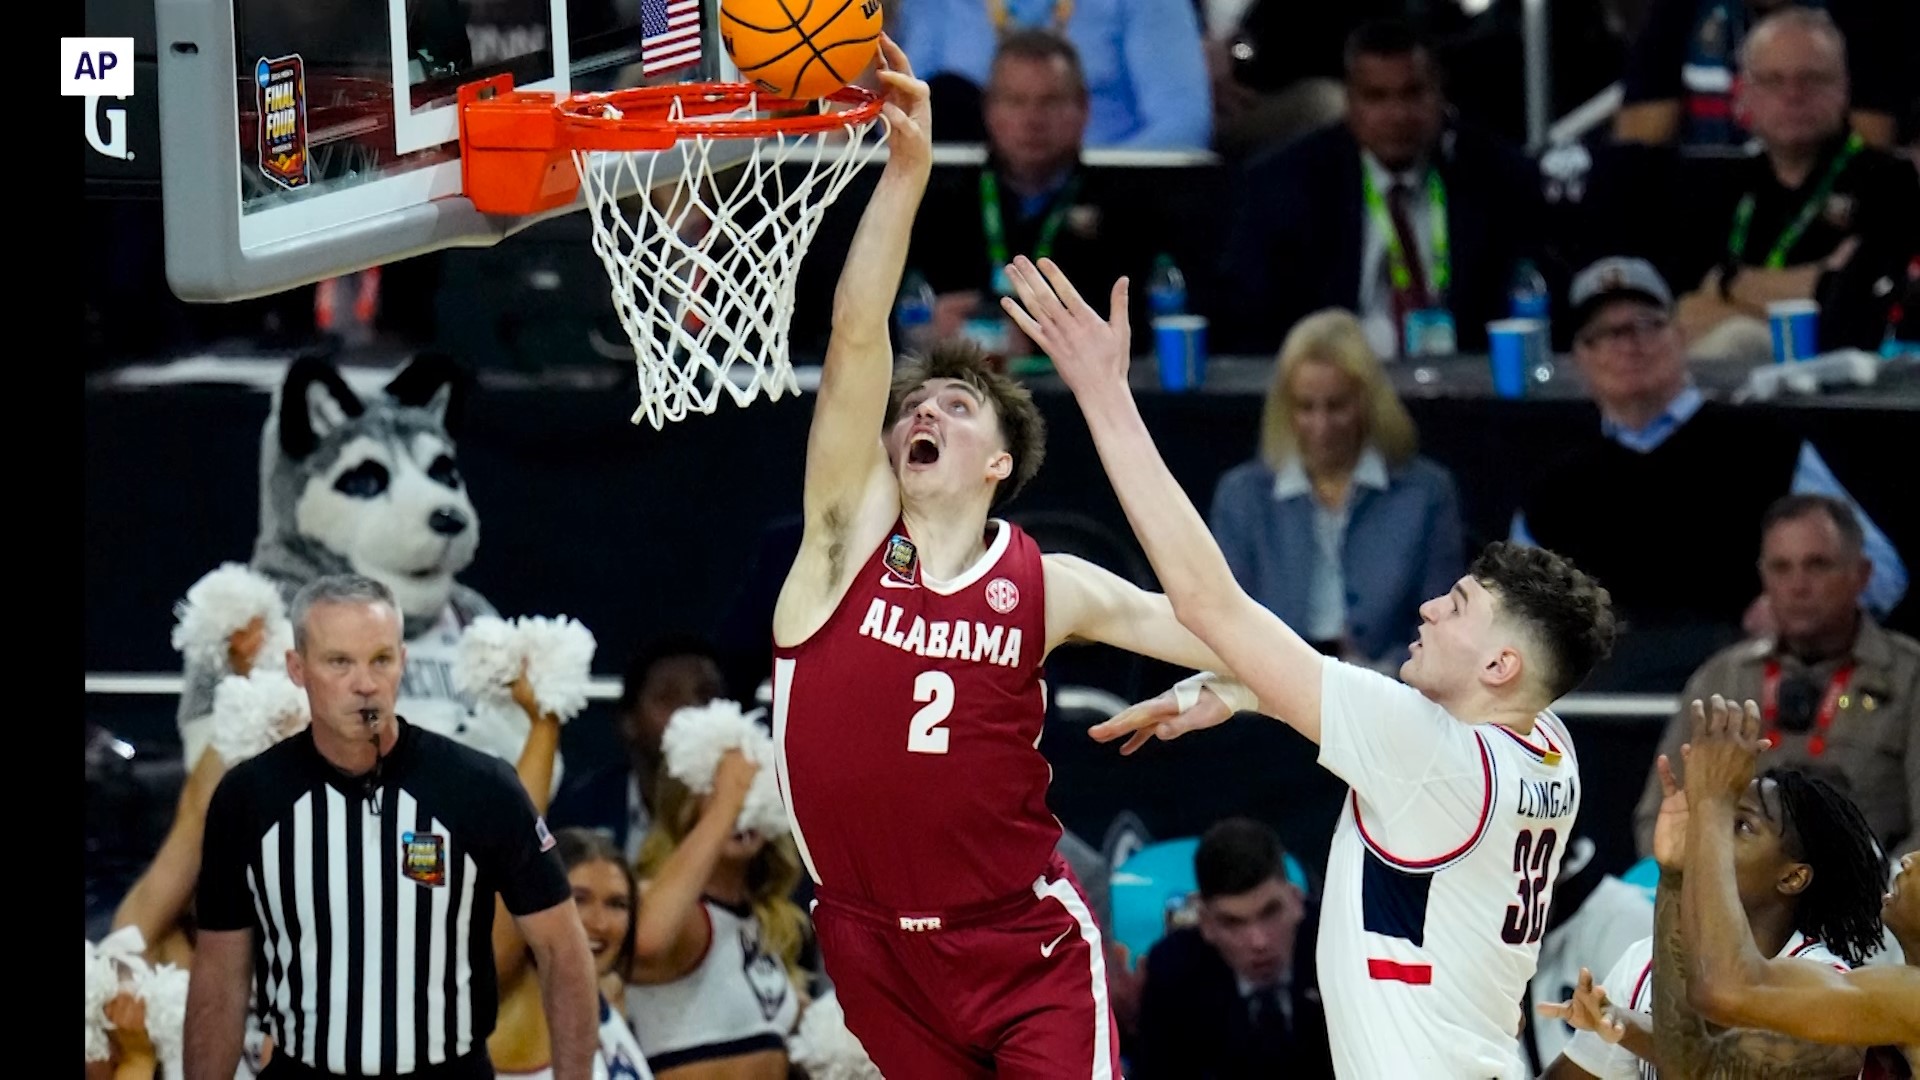 Alabama's run to its first national championship was knocked off track Saturday by defending national champ UConn in a hard-fought game.